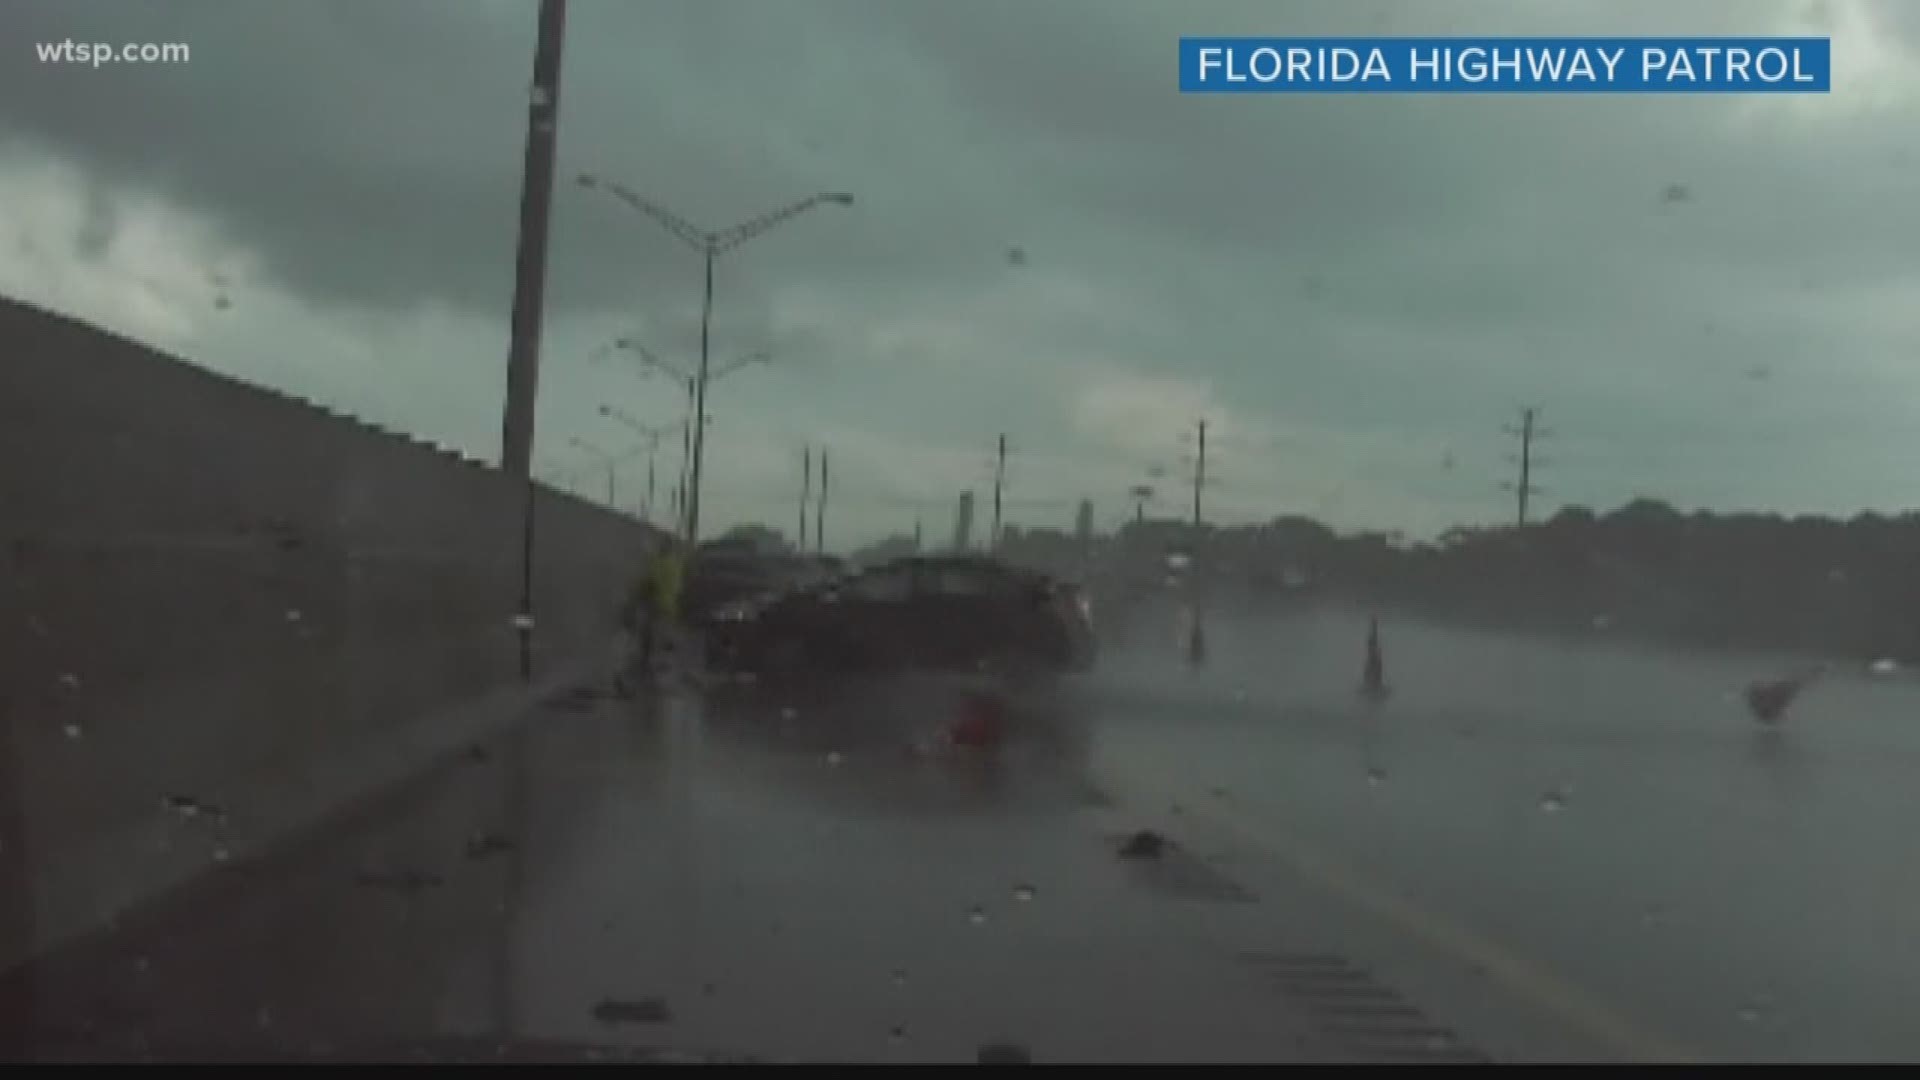 The Florida Highway Patrol trooper jumped just in time before a hydroplaning car would've slammed into his body. Also, strong winds tip over an RV in Polk County; fortunately no one was hurt.